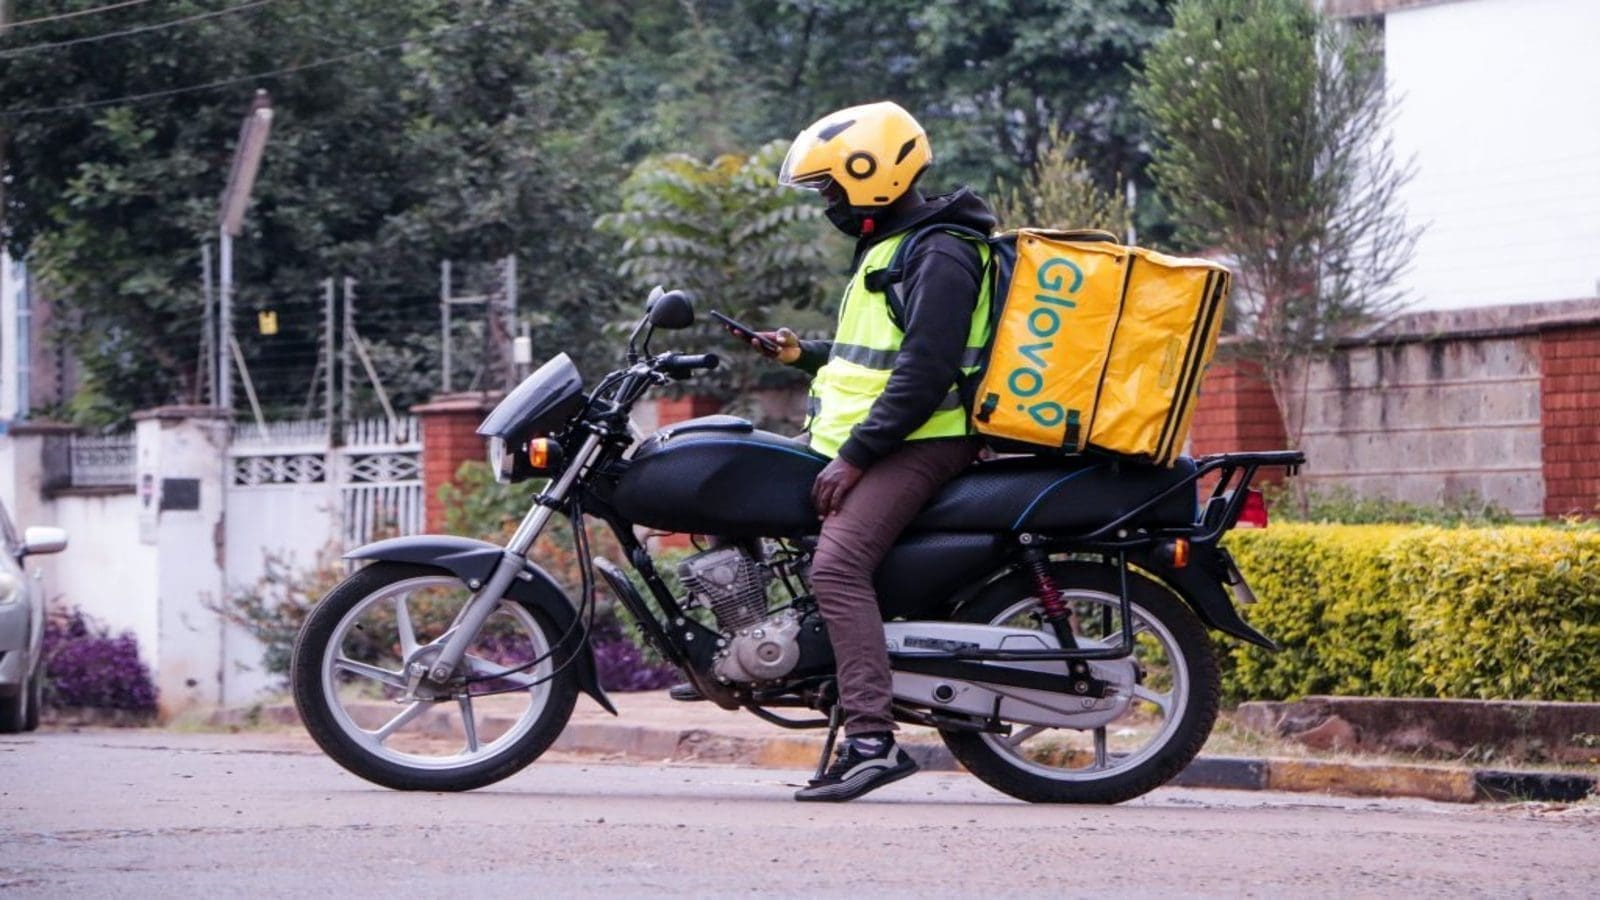 Glovo pilots Kibanda Bubble platform to link food-related SMEs to customers